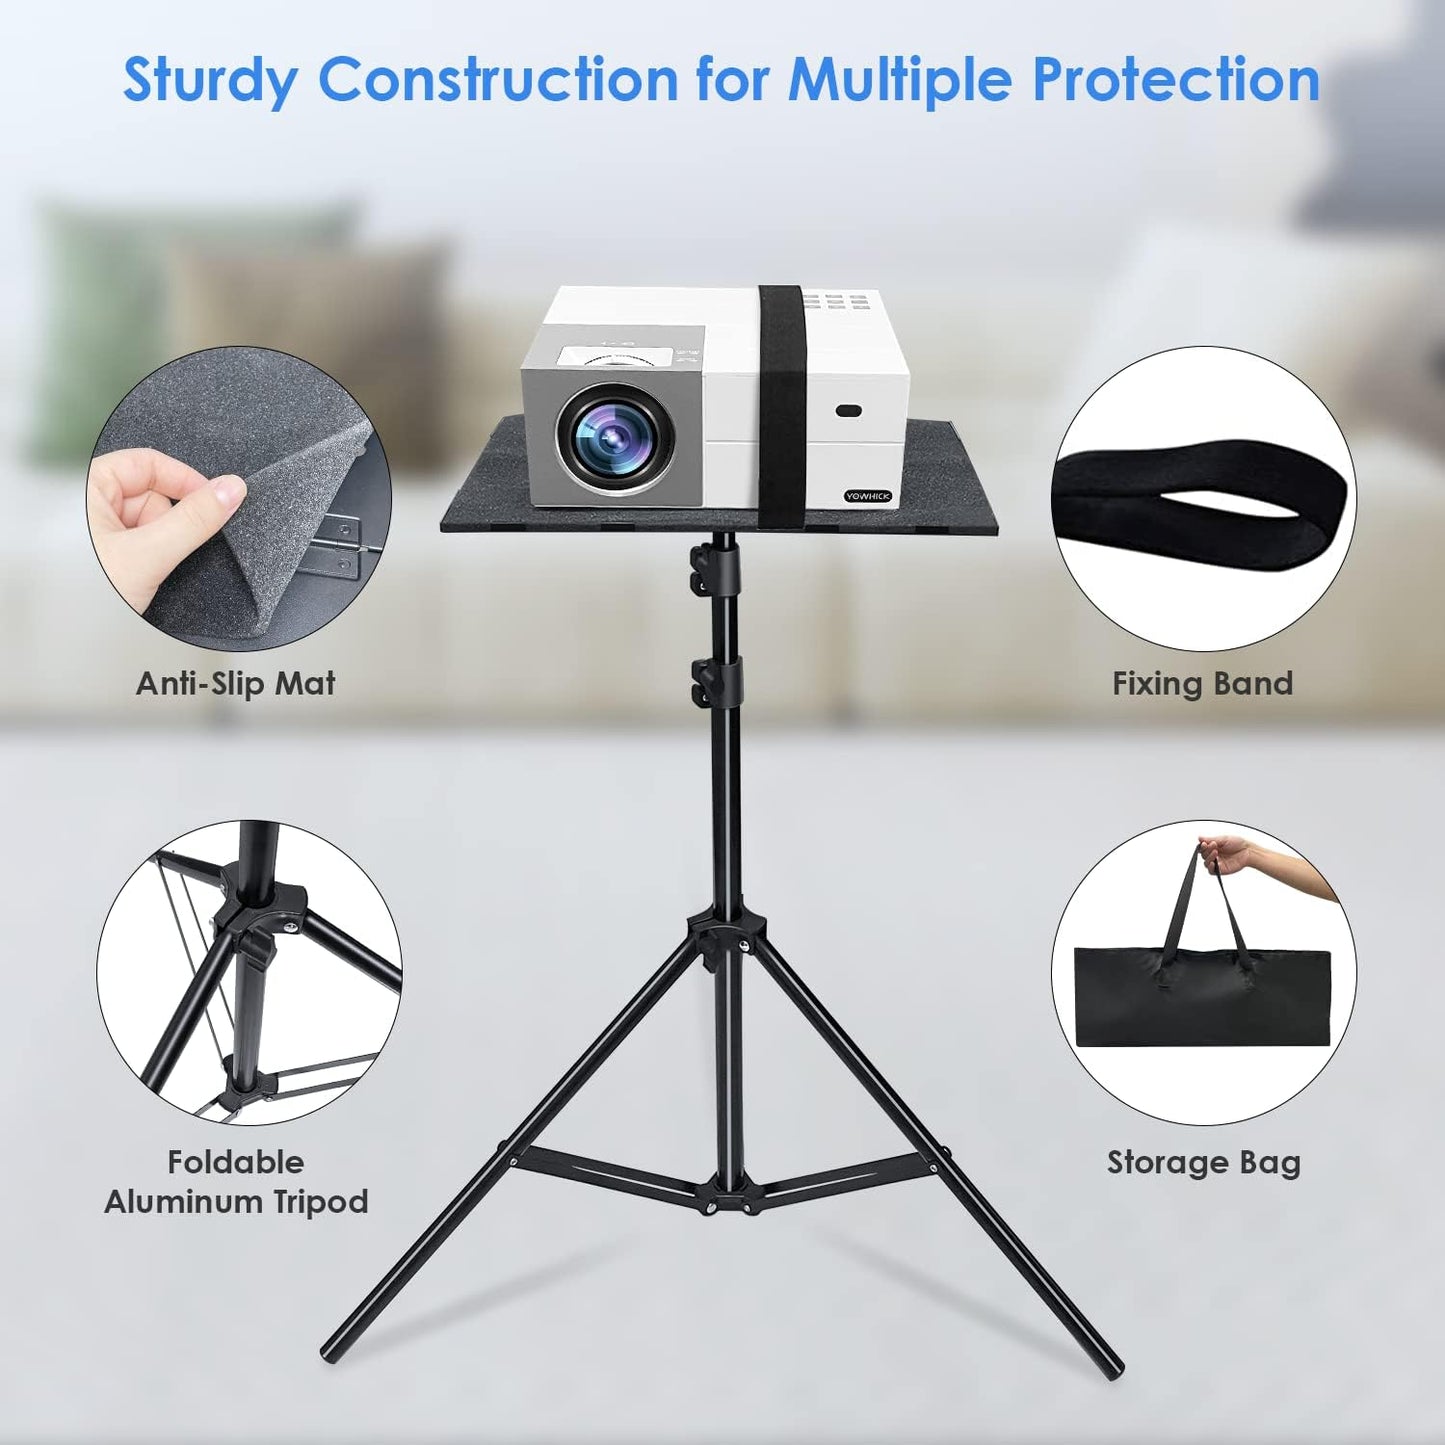 YOWHICK DP01 WiFi Bluetooth Projector and Projector Tripod Stand Bundle - YOWHICK